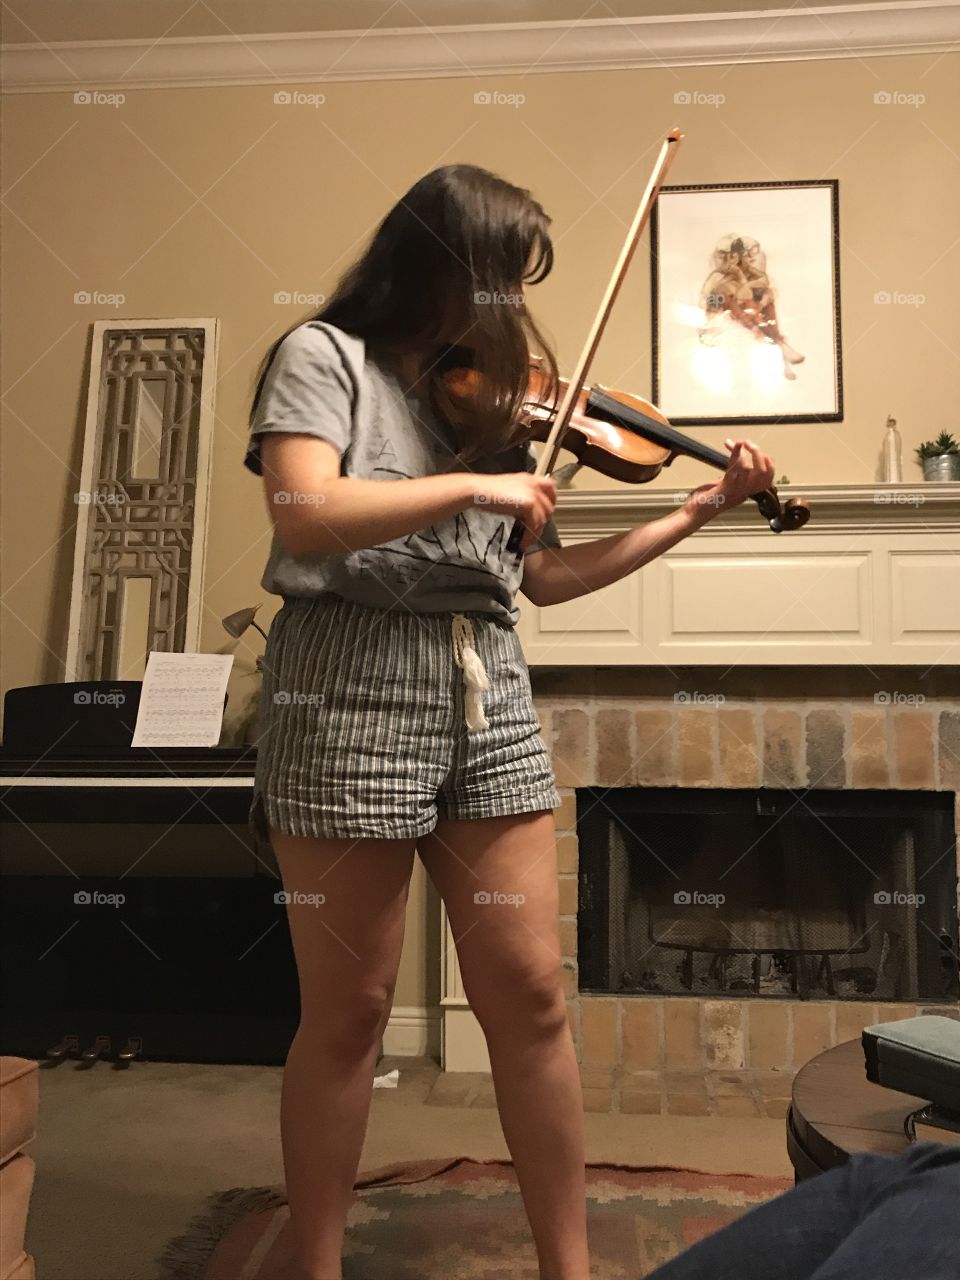 A passionate musician practicing at home. Comfortable clothes, cozy living room, fireplace, and a beautiful violin. 